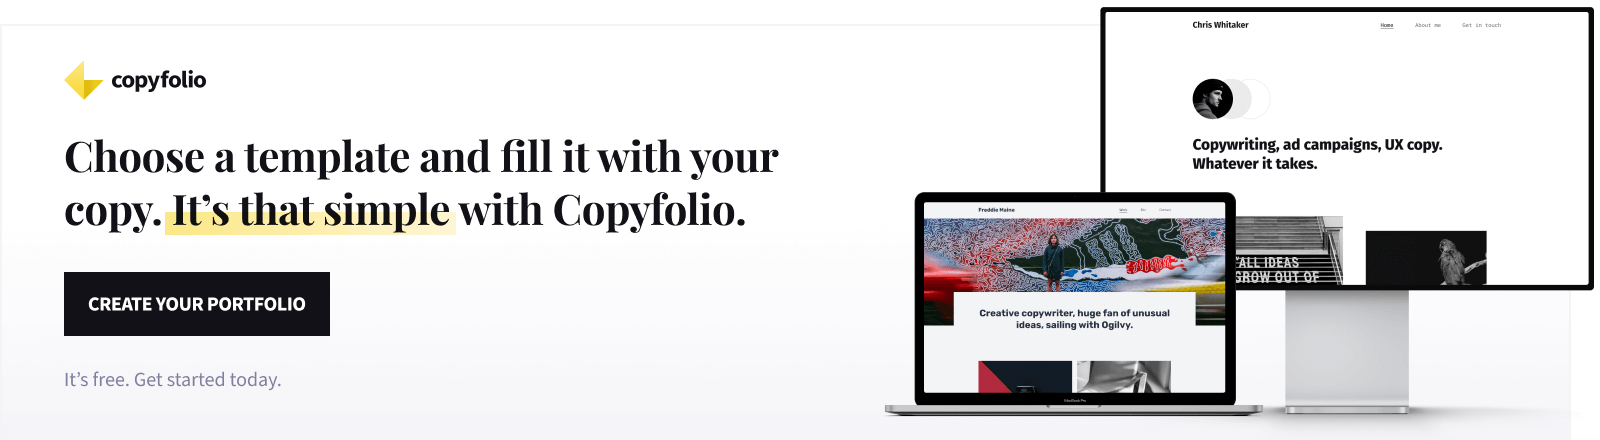 Choose a template and fill it with your copy. It's that simple with Copyfolio. Create your portfolio, it's free.